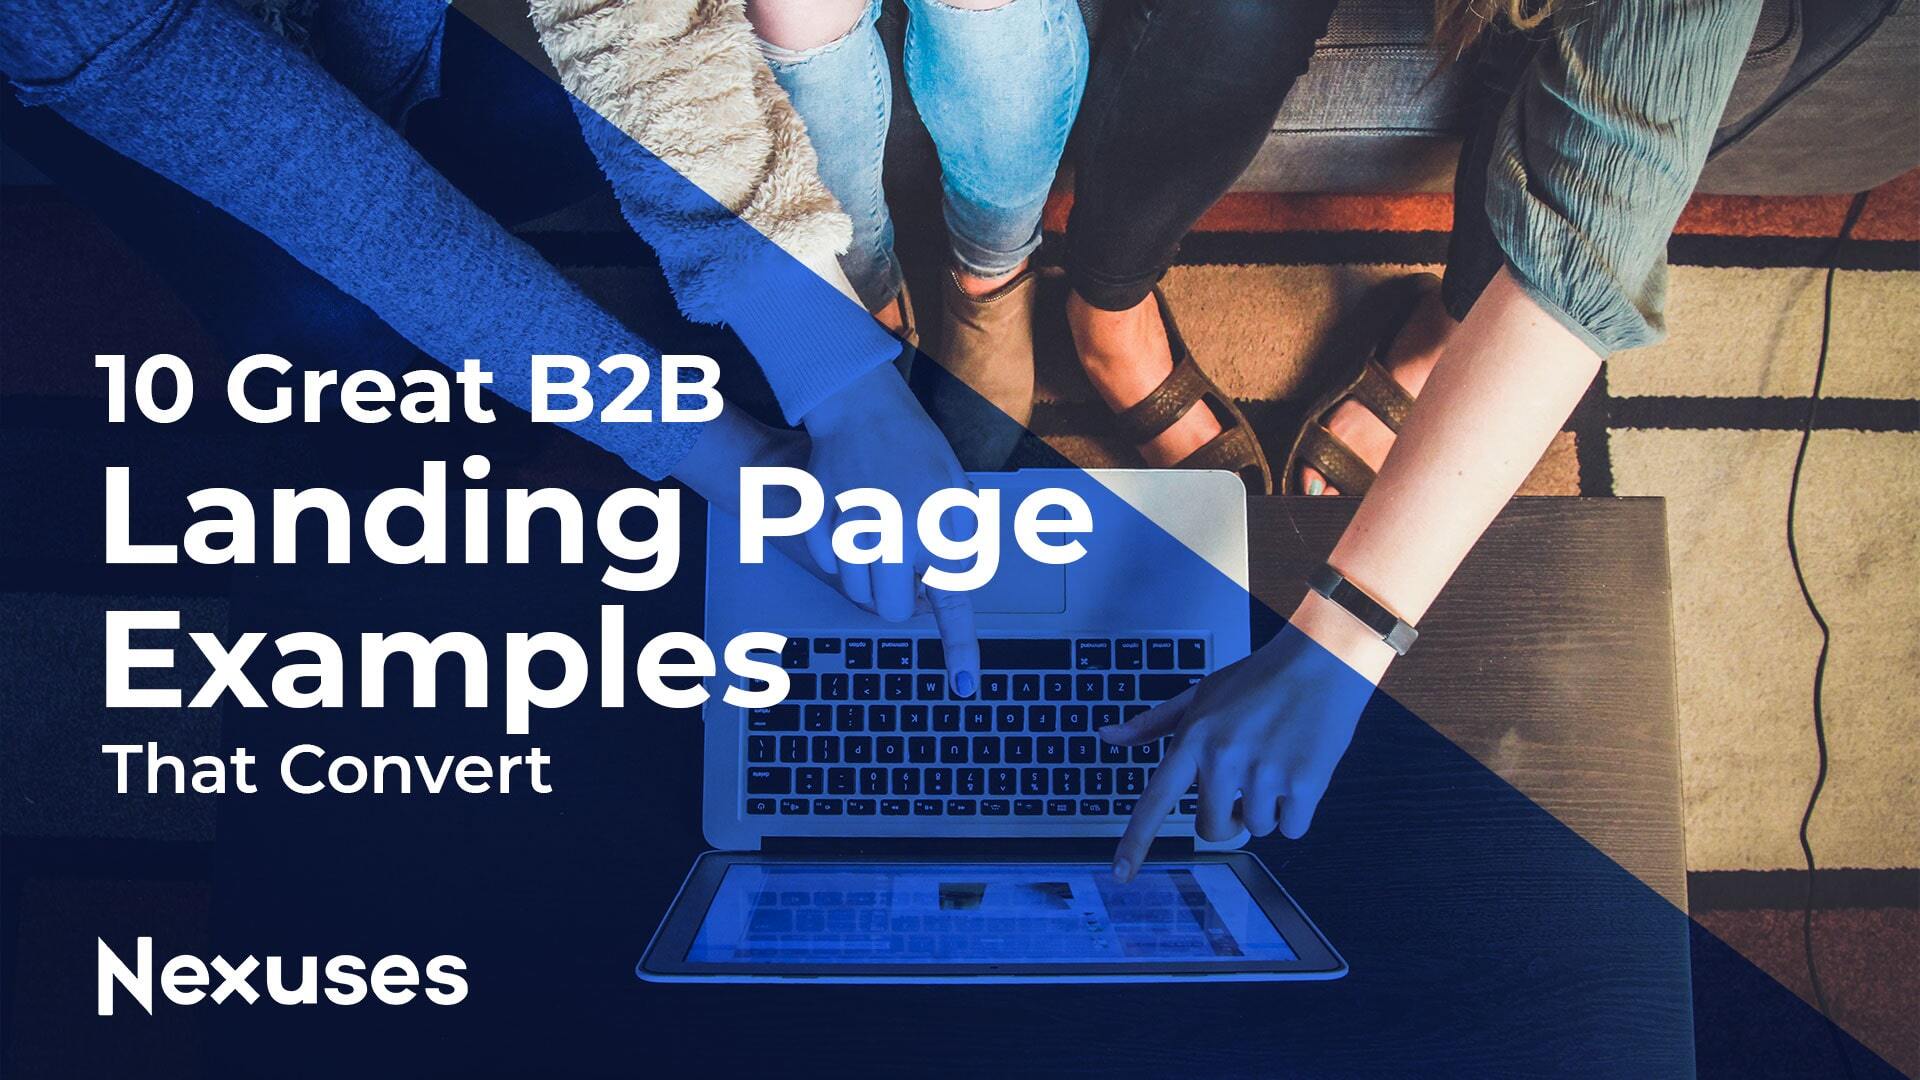 best about us pages for b2b